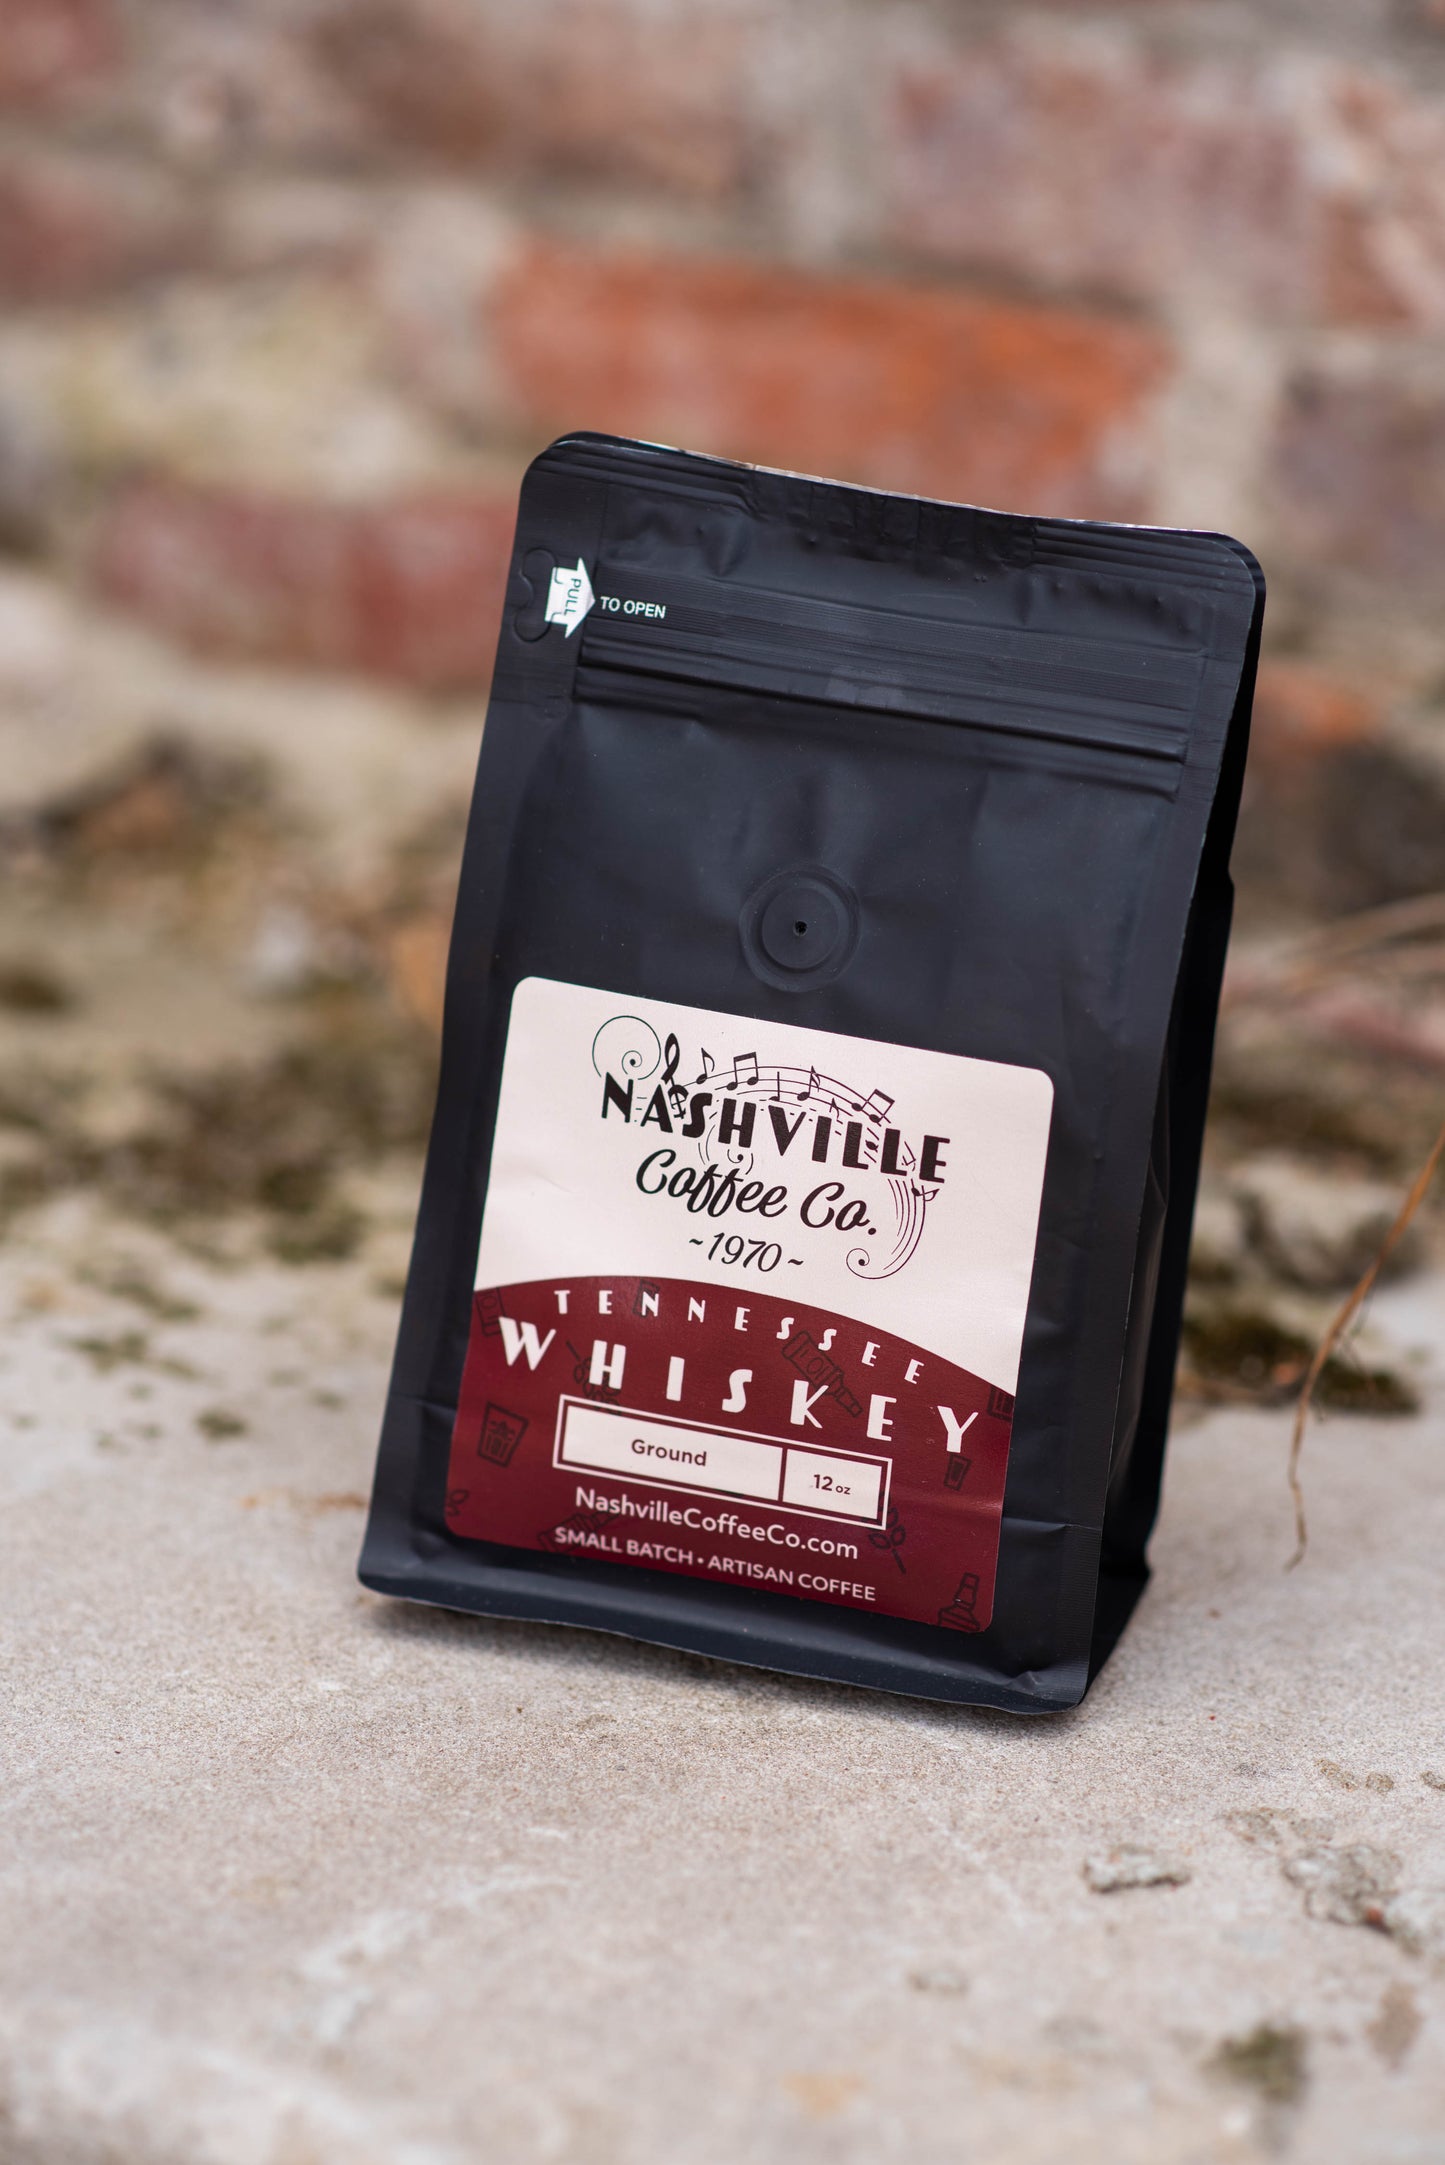 Nashville Coffee Co “Tennessee Whiskey” 12oz Ground Bag